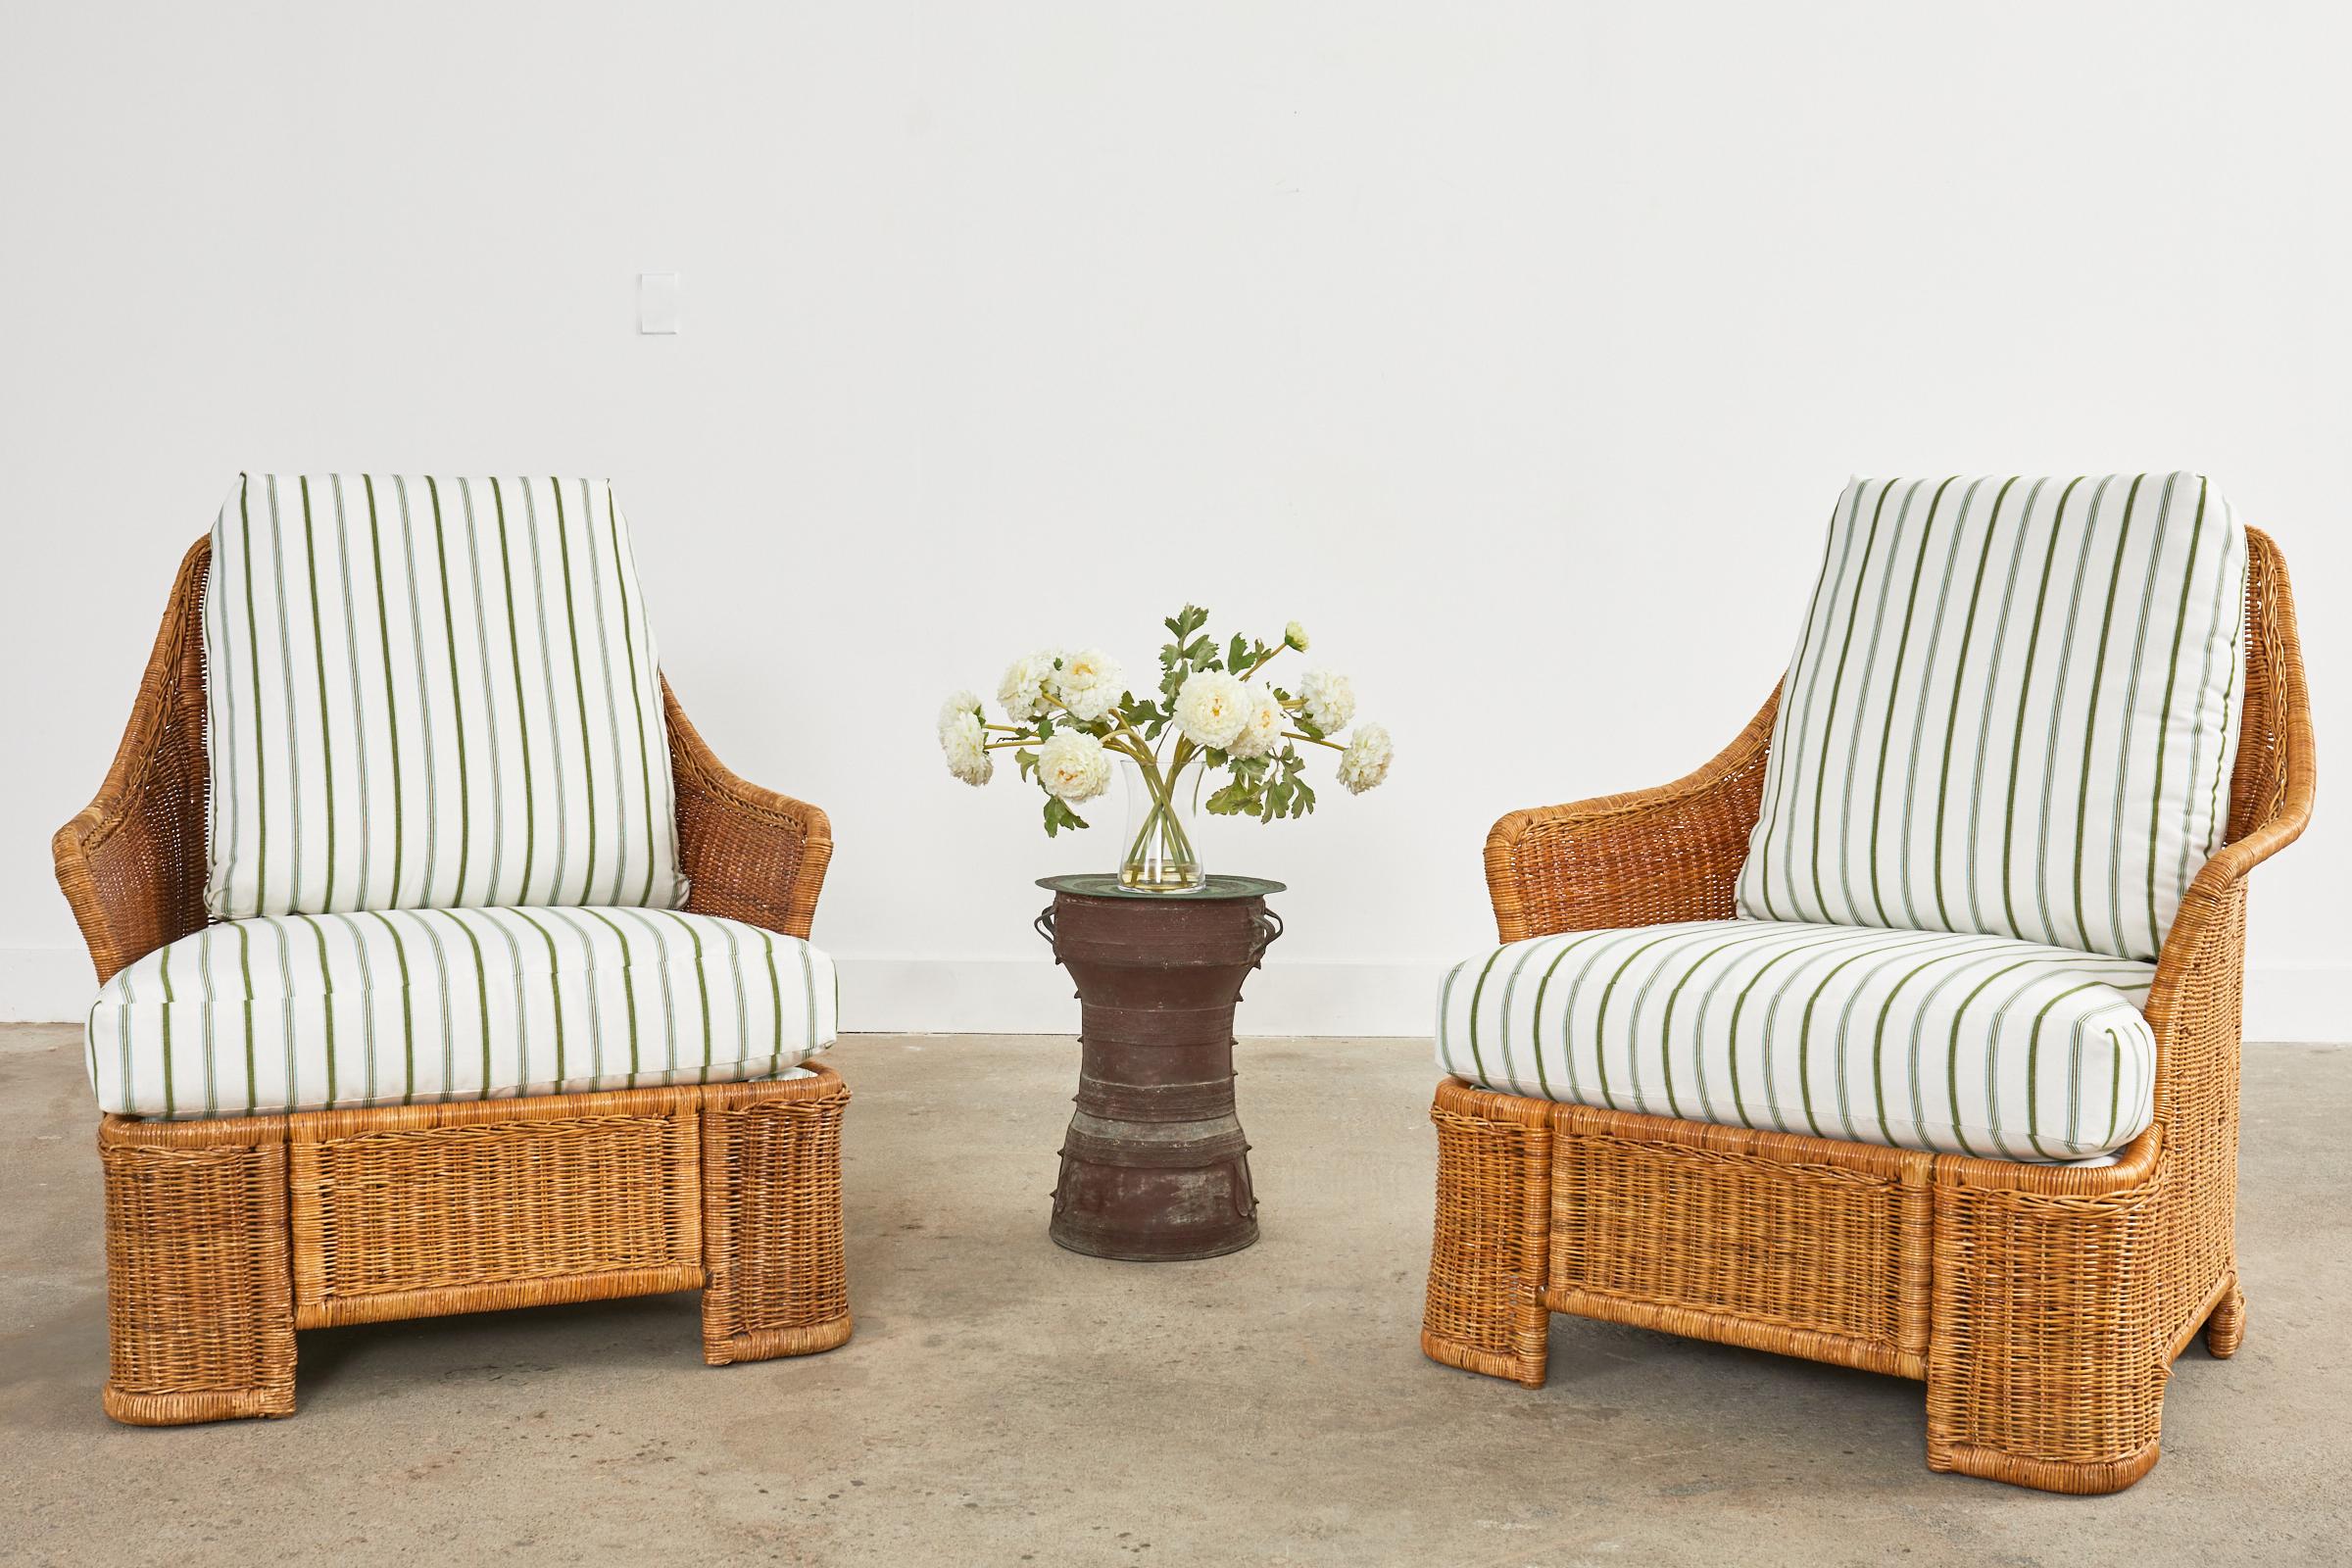 Sinuous pair of Mid-Century Modern wicker lounge chairs with newly upholstered seat cushions. The chairs feature a tubular metal frame which is very strong and stable wrapped with organic modern wicker. The frames have gracefully curved backs and